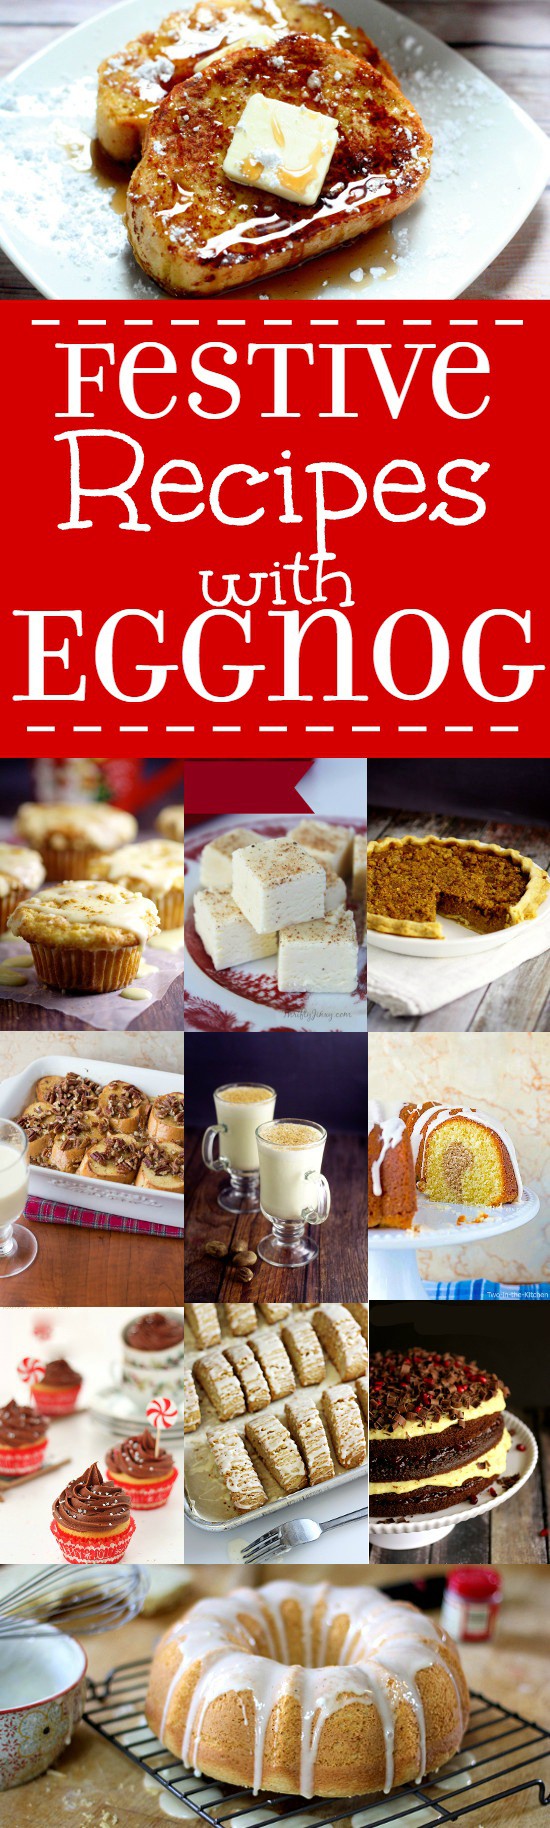 Perfect Festive Recipes with Eggnog that your family, friends, and guests will love for Christmas.  A favorite holiday flavor to add a special touch to your holiday! Eggnog dessert recipes are so delicious! Yum!